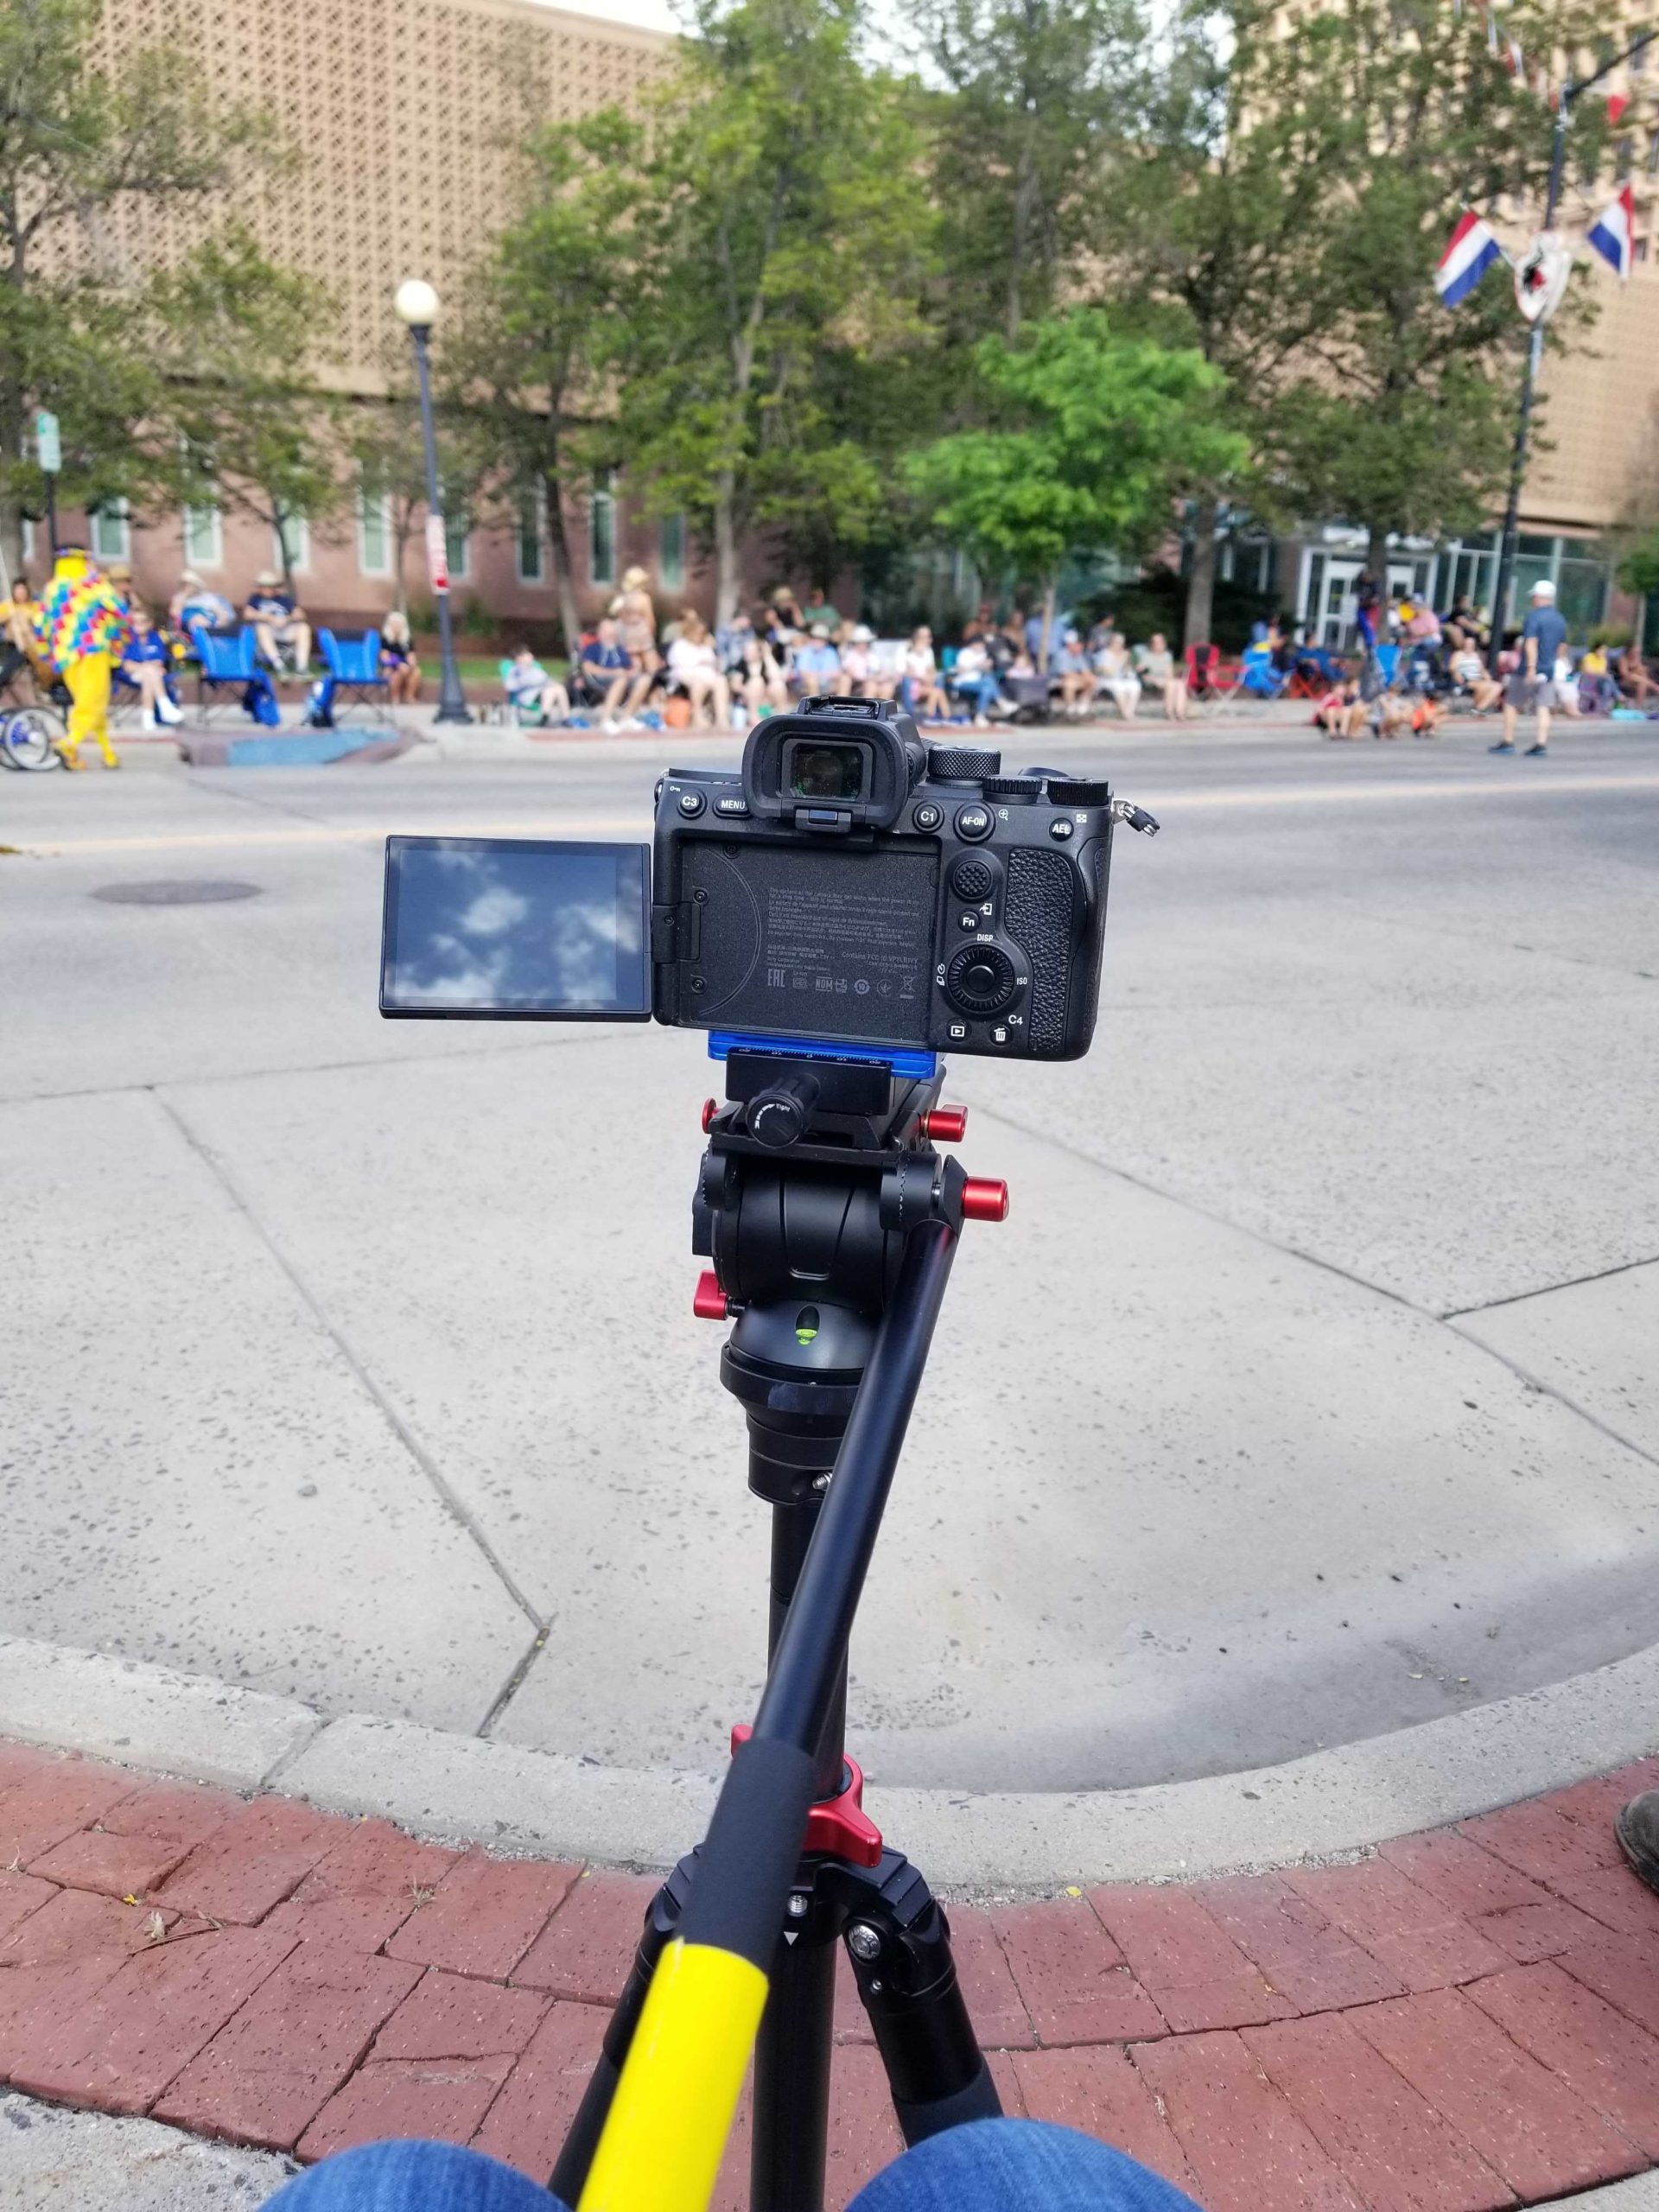 View from behind the camera of the parade route